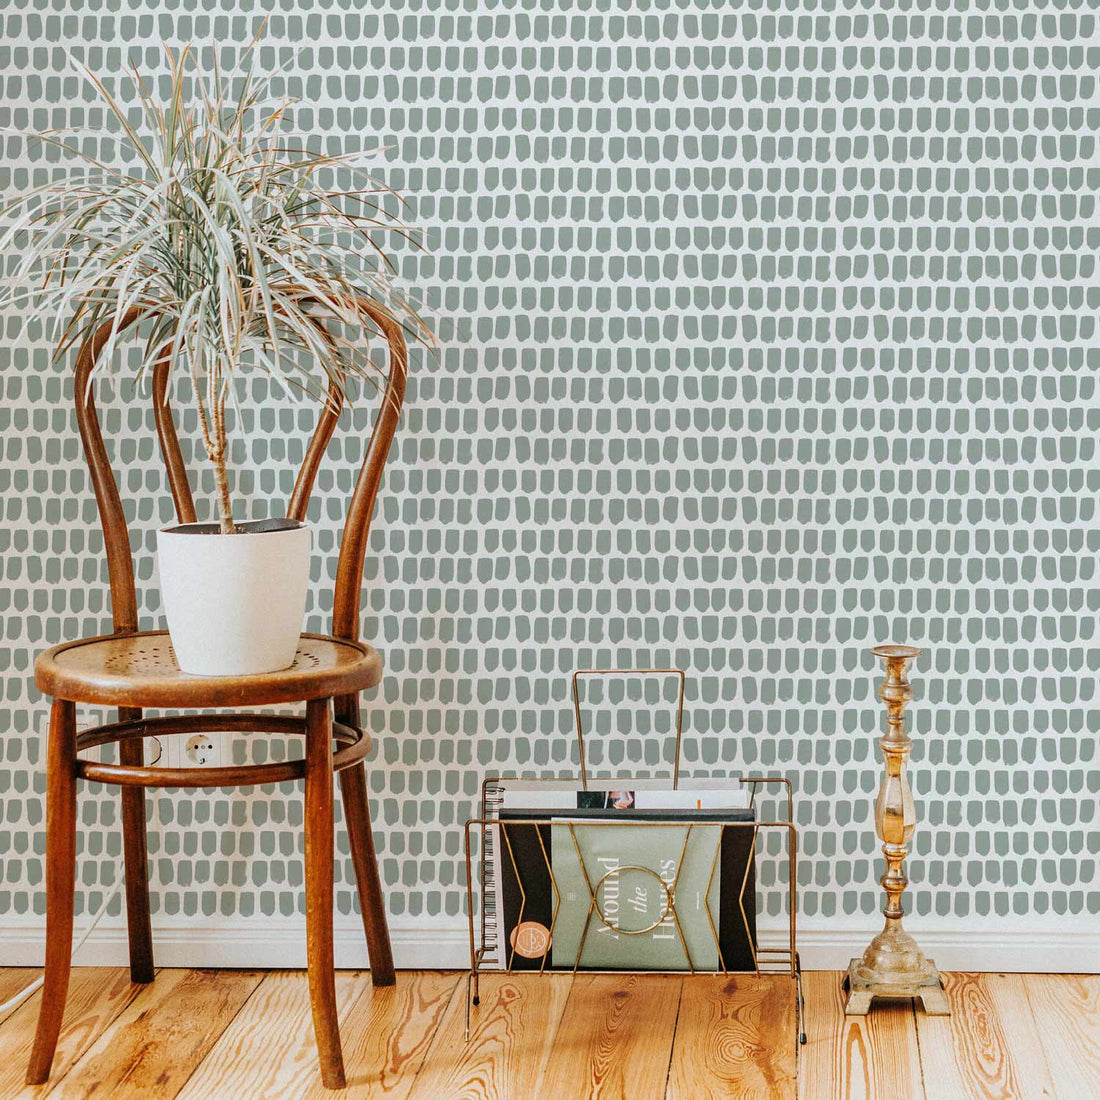 Sage green removable wallpaper in bohemian style home interior